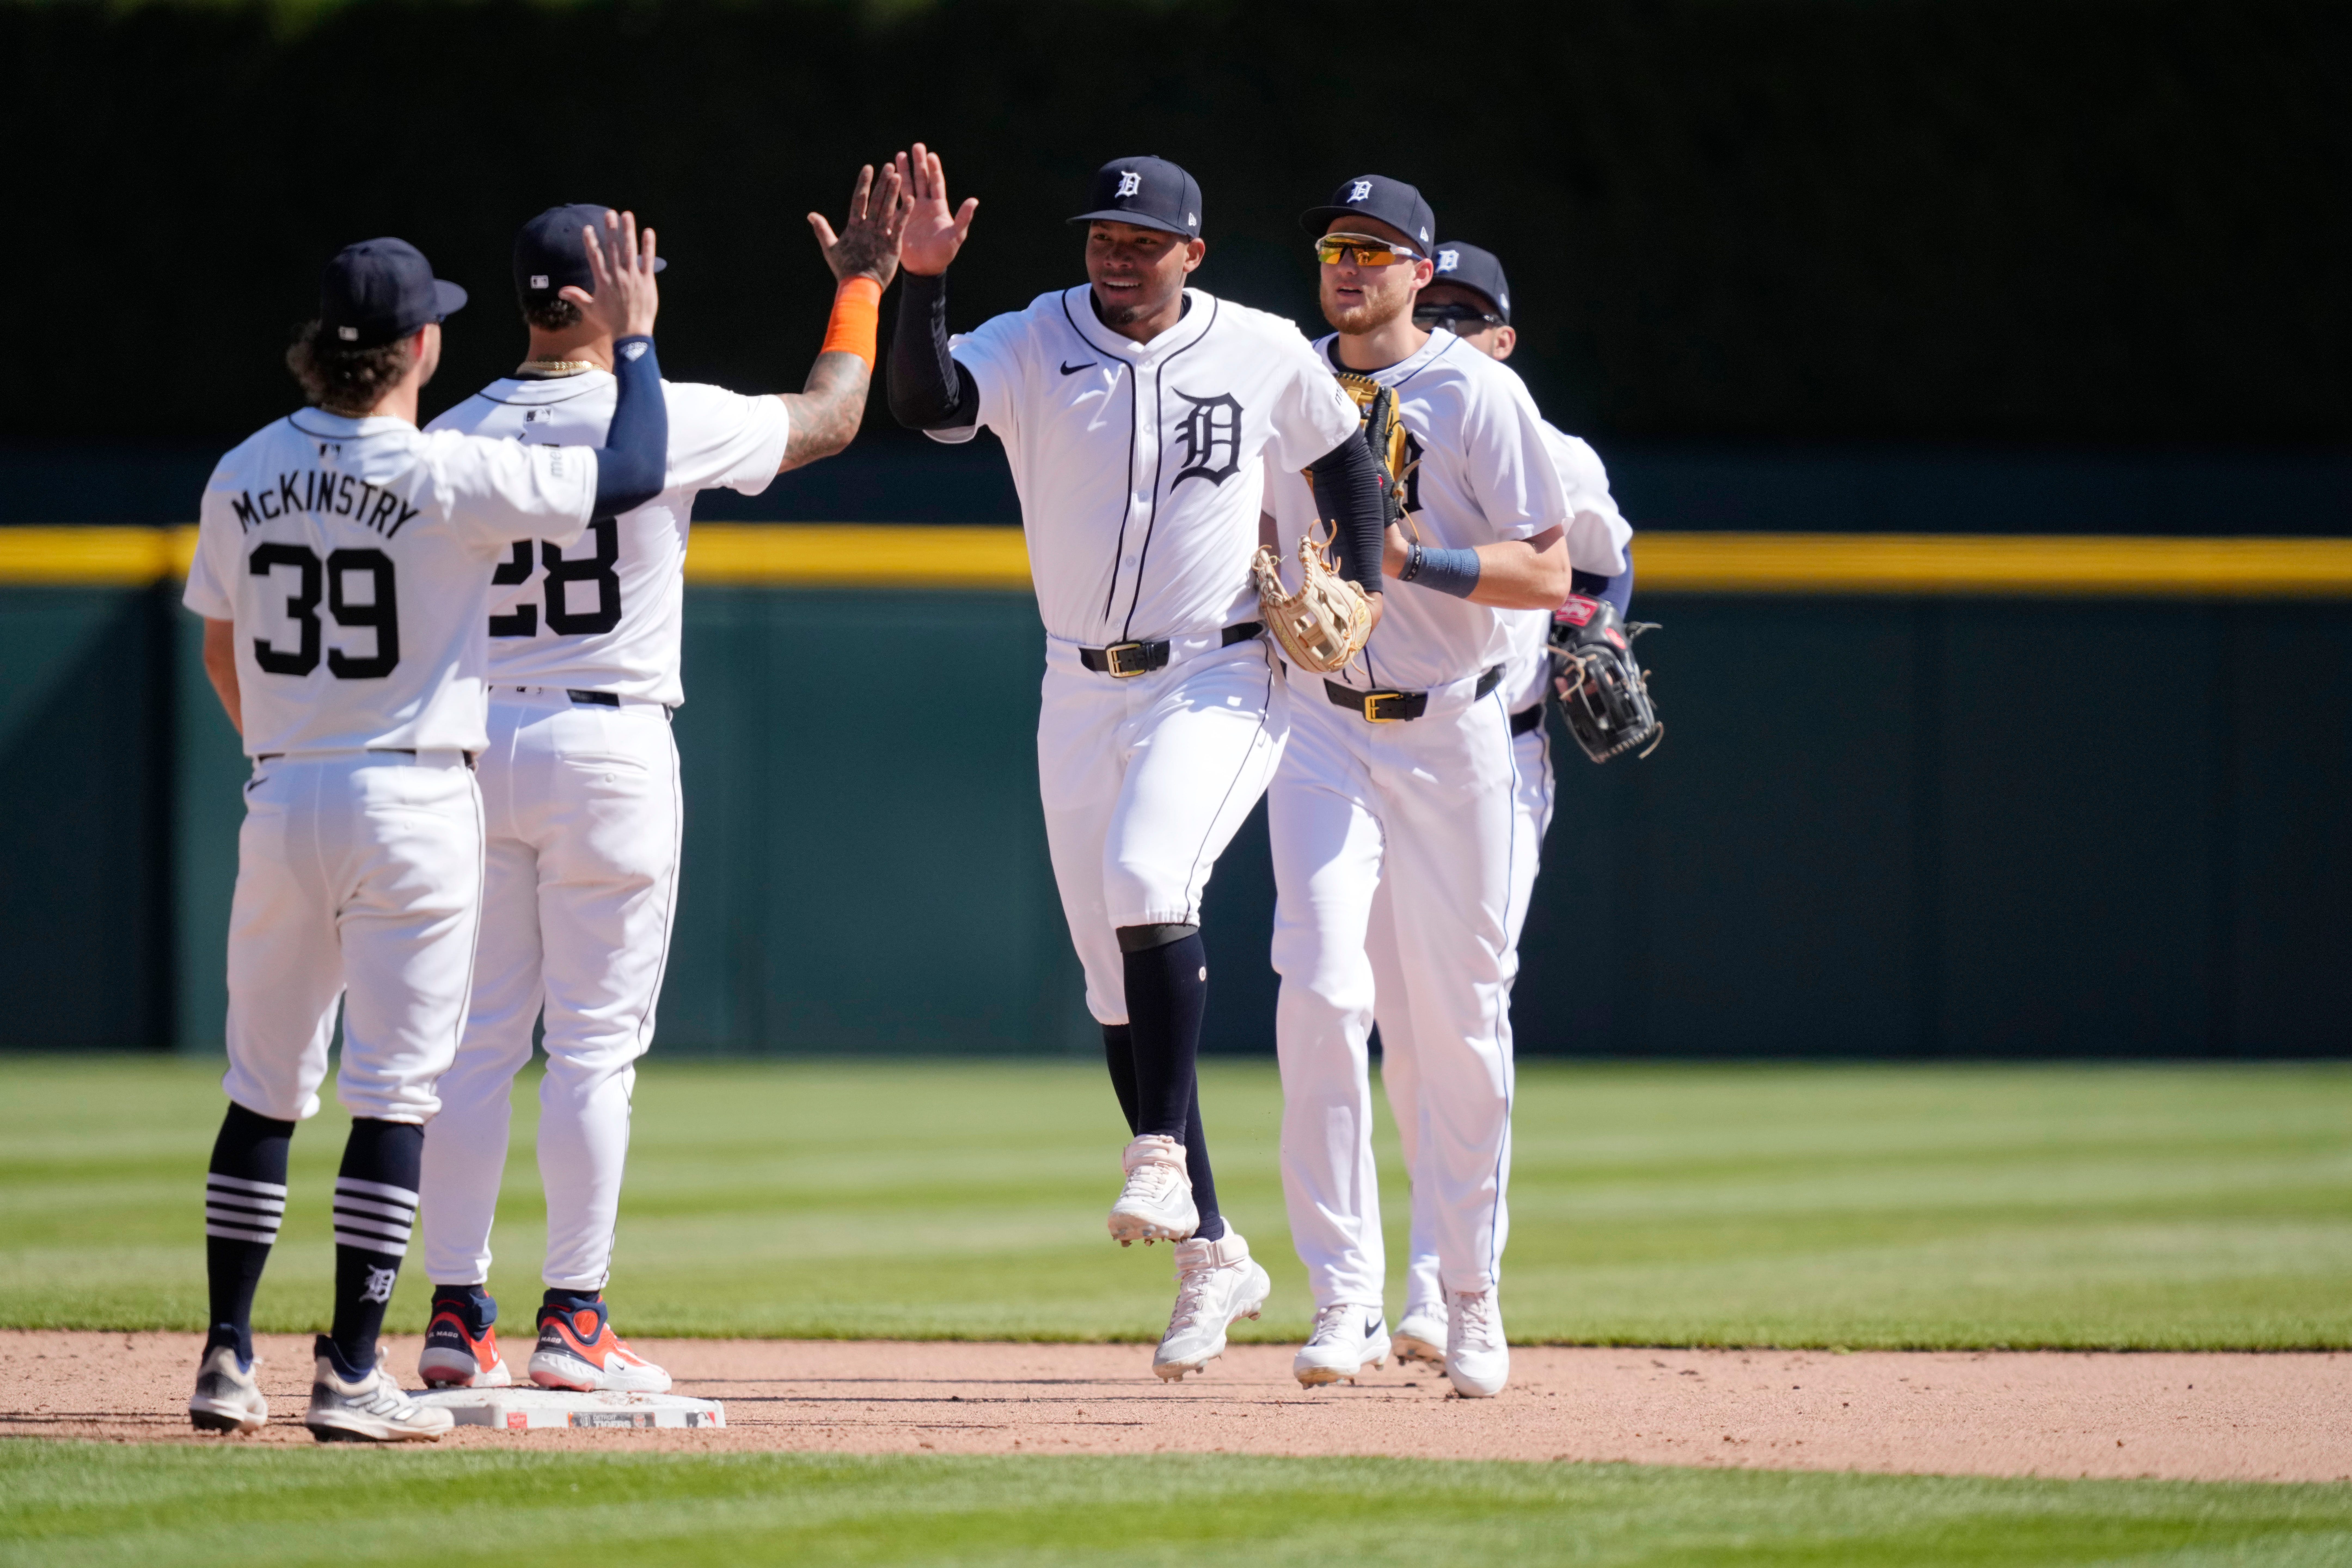 Detroit Tigers right fielder Wenceel Perez high fives shortstop Javier Baez after the end of the ninth inning as the Tigers beat the Rangers, 4 to 2.